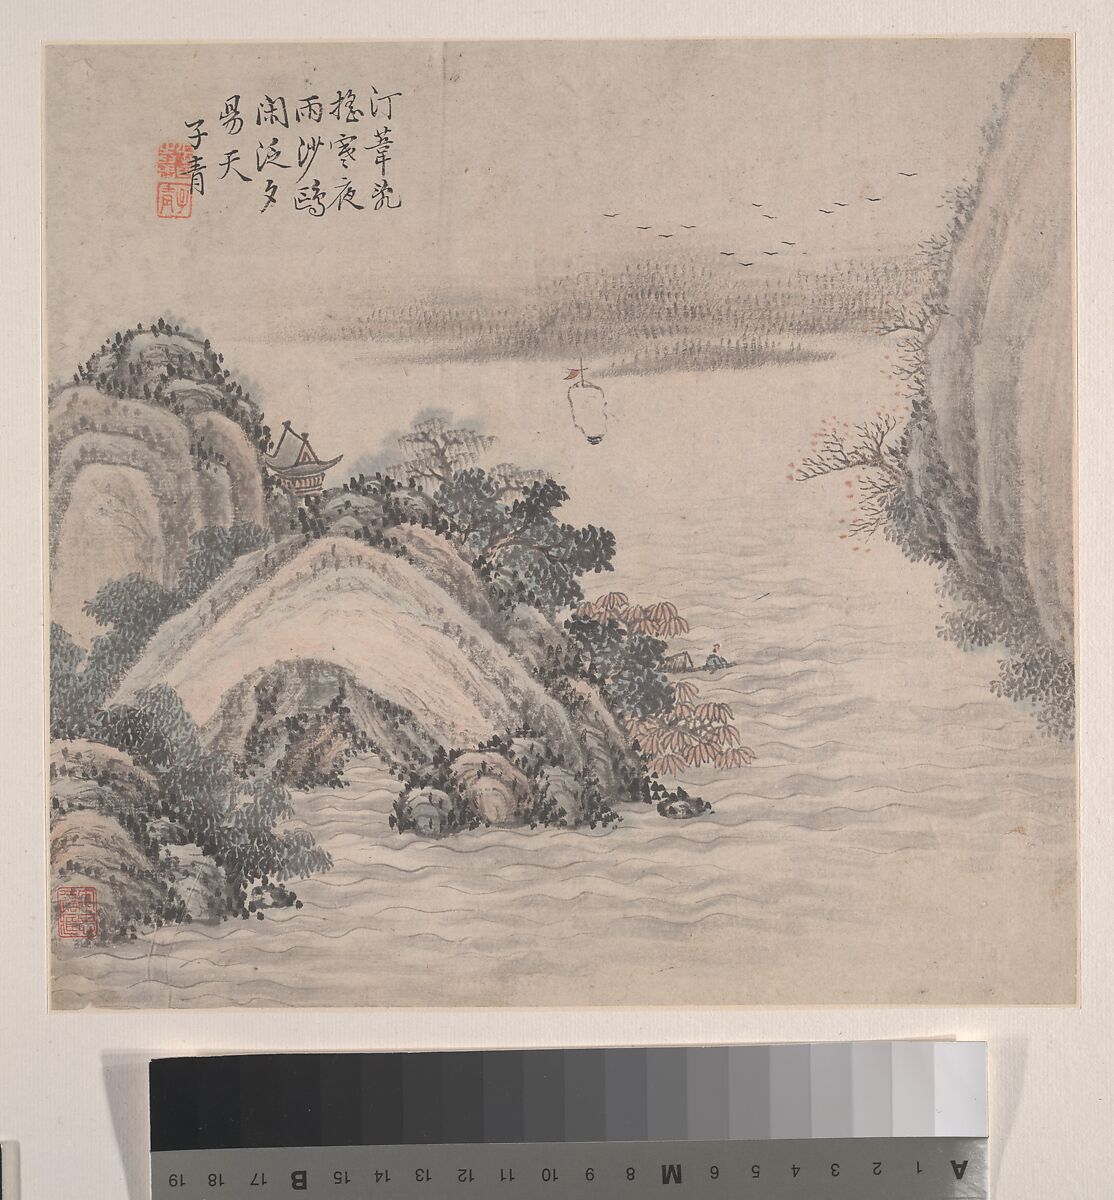 Landscapes, Zhang Zhiwan (Chinese, 1811–1897), Album of twelve leaves; ink and color on paper, China 